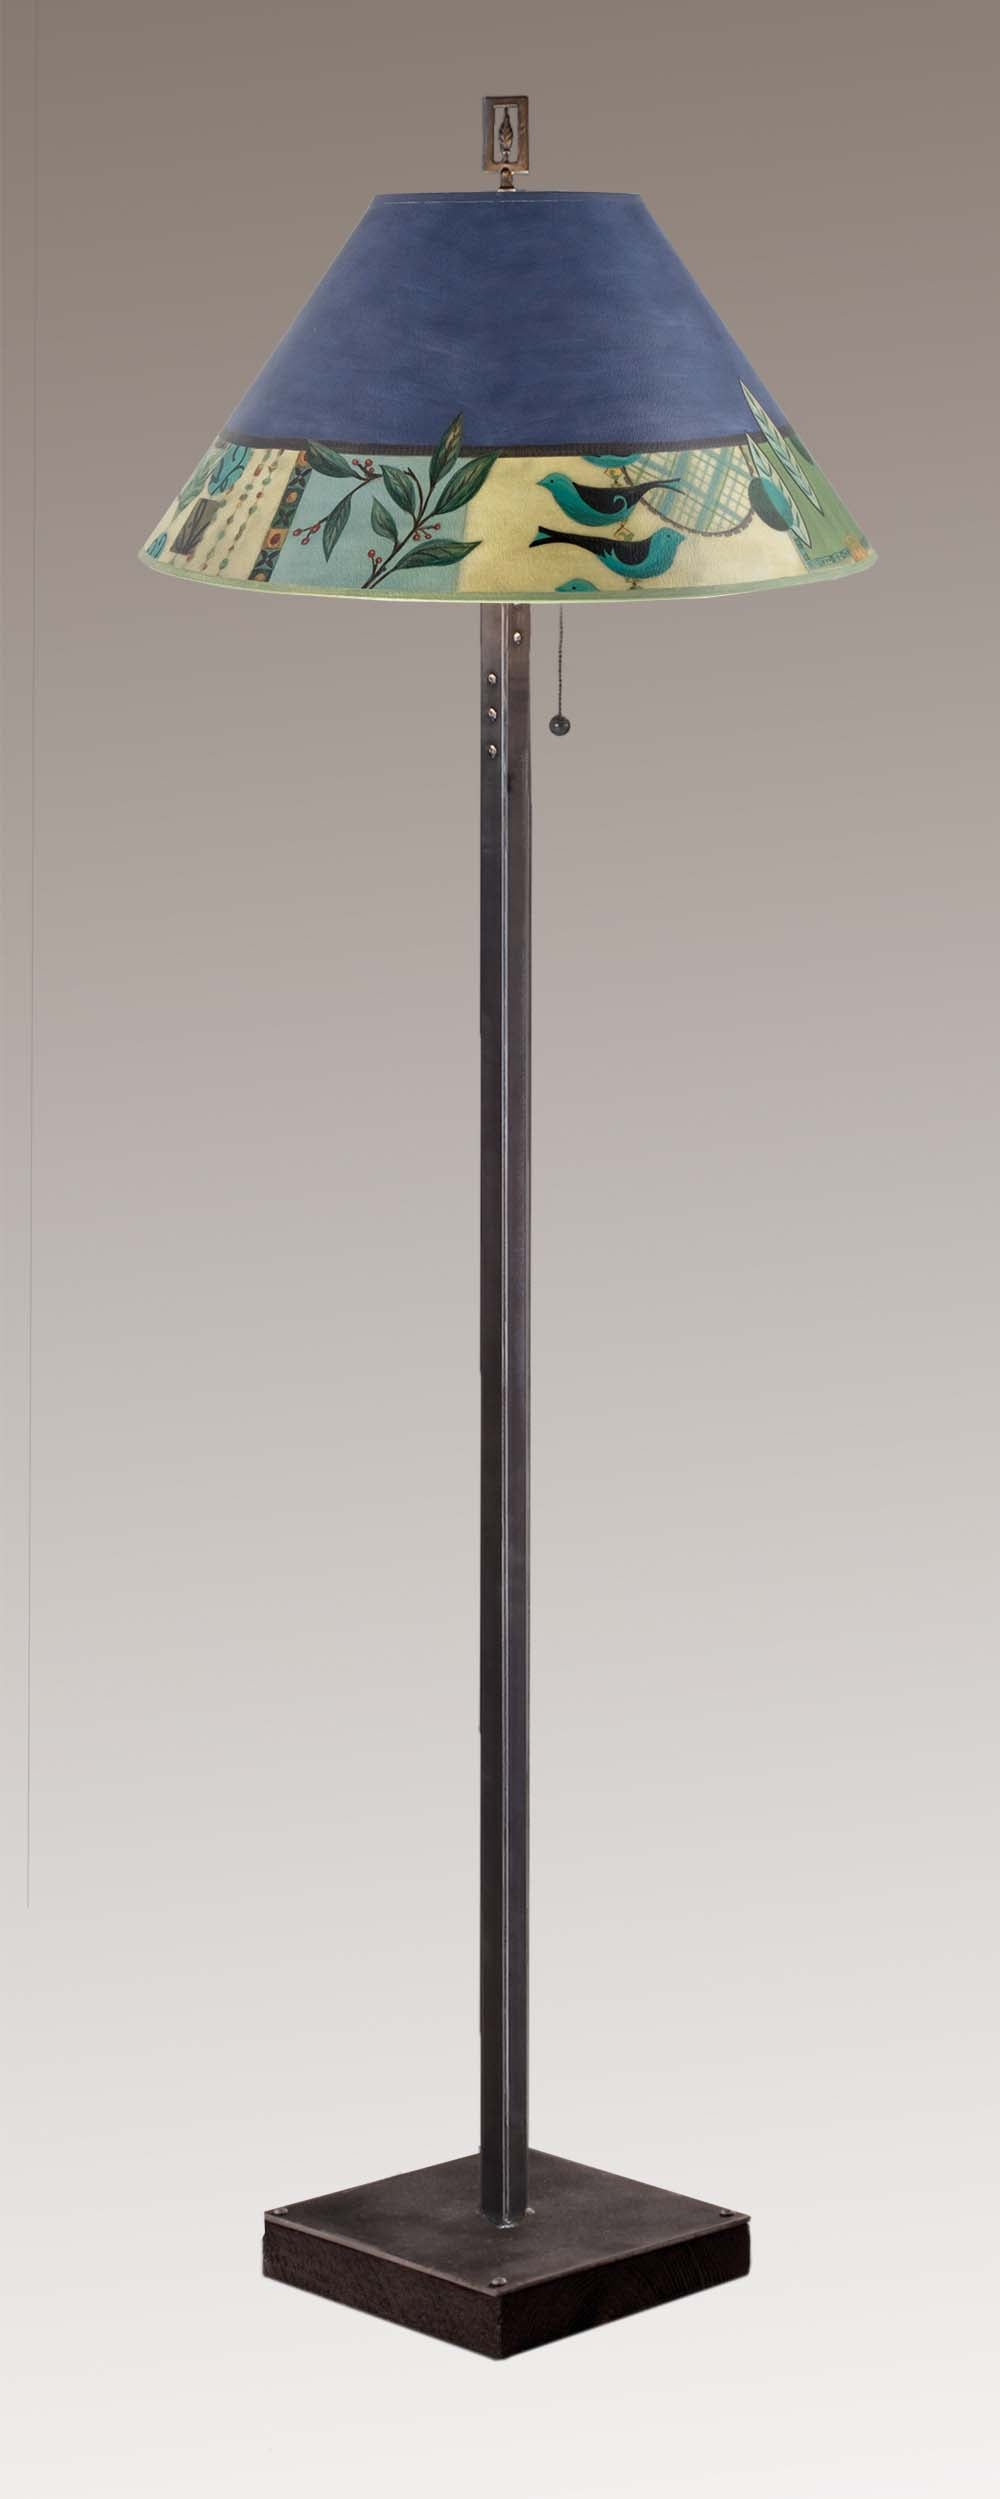 Janna Ugone & Co Floor Lamps Steel Floor Lamp on  Reclaimed Wood with Large Conical Shade in New Capri Periwinkle